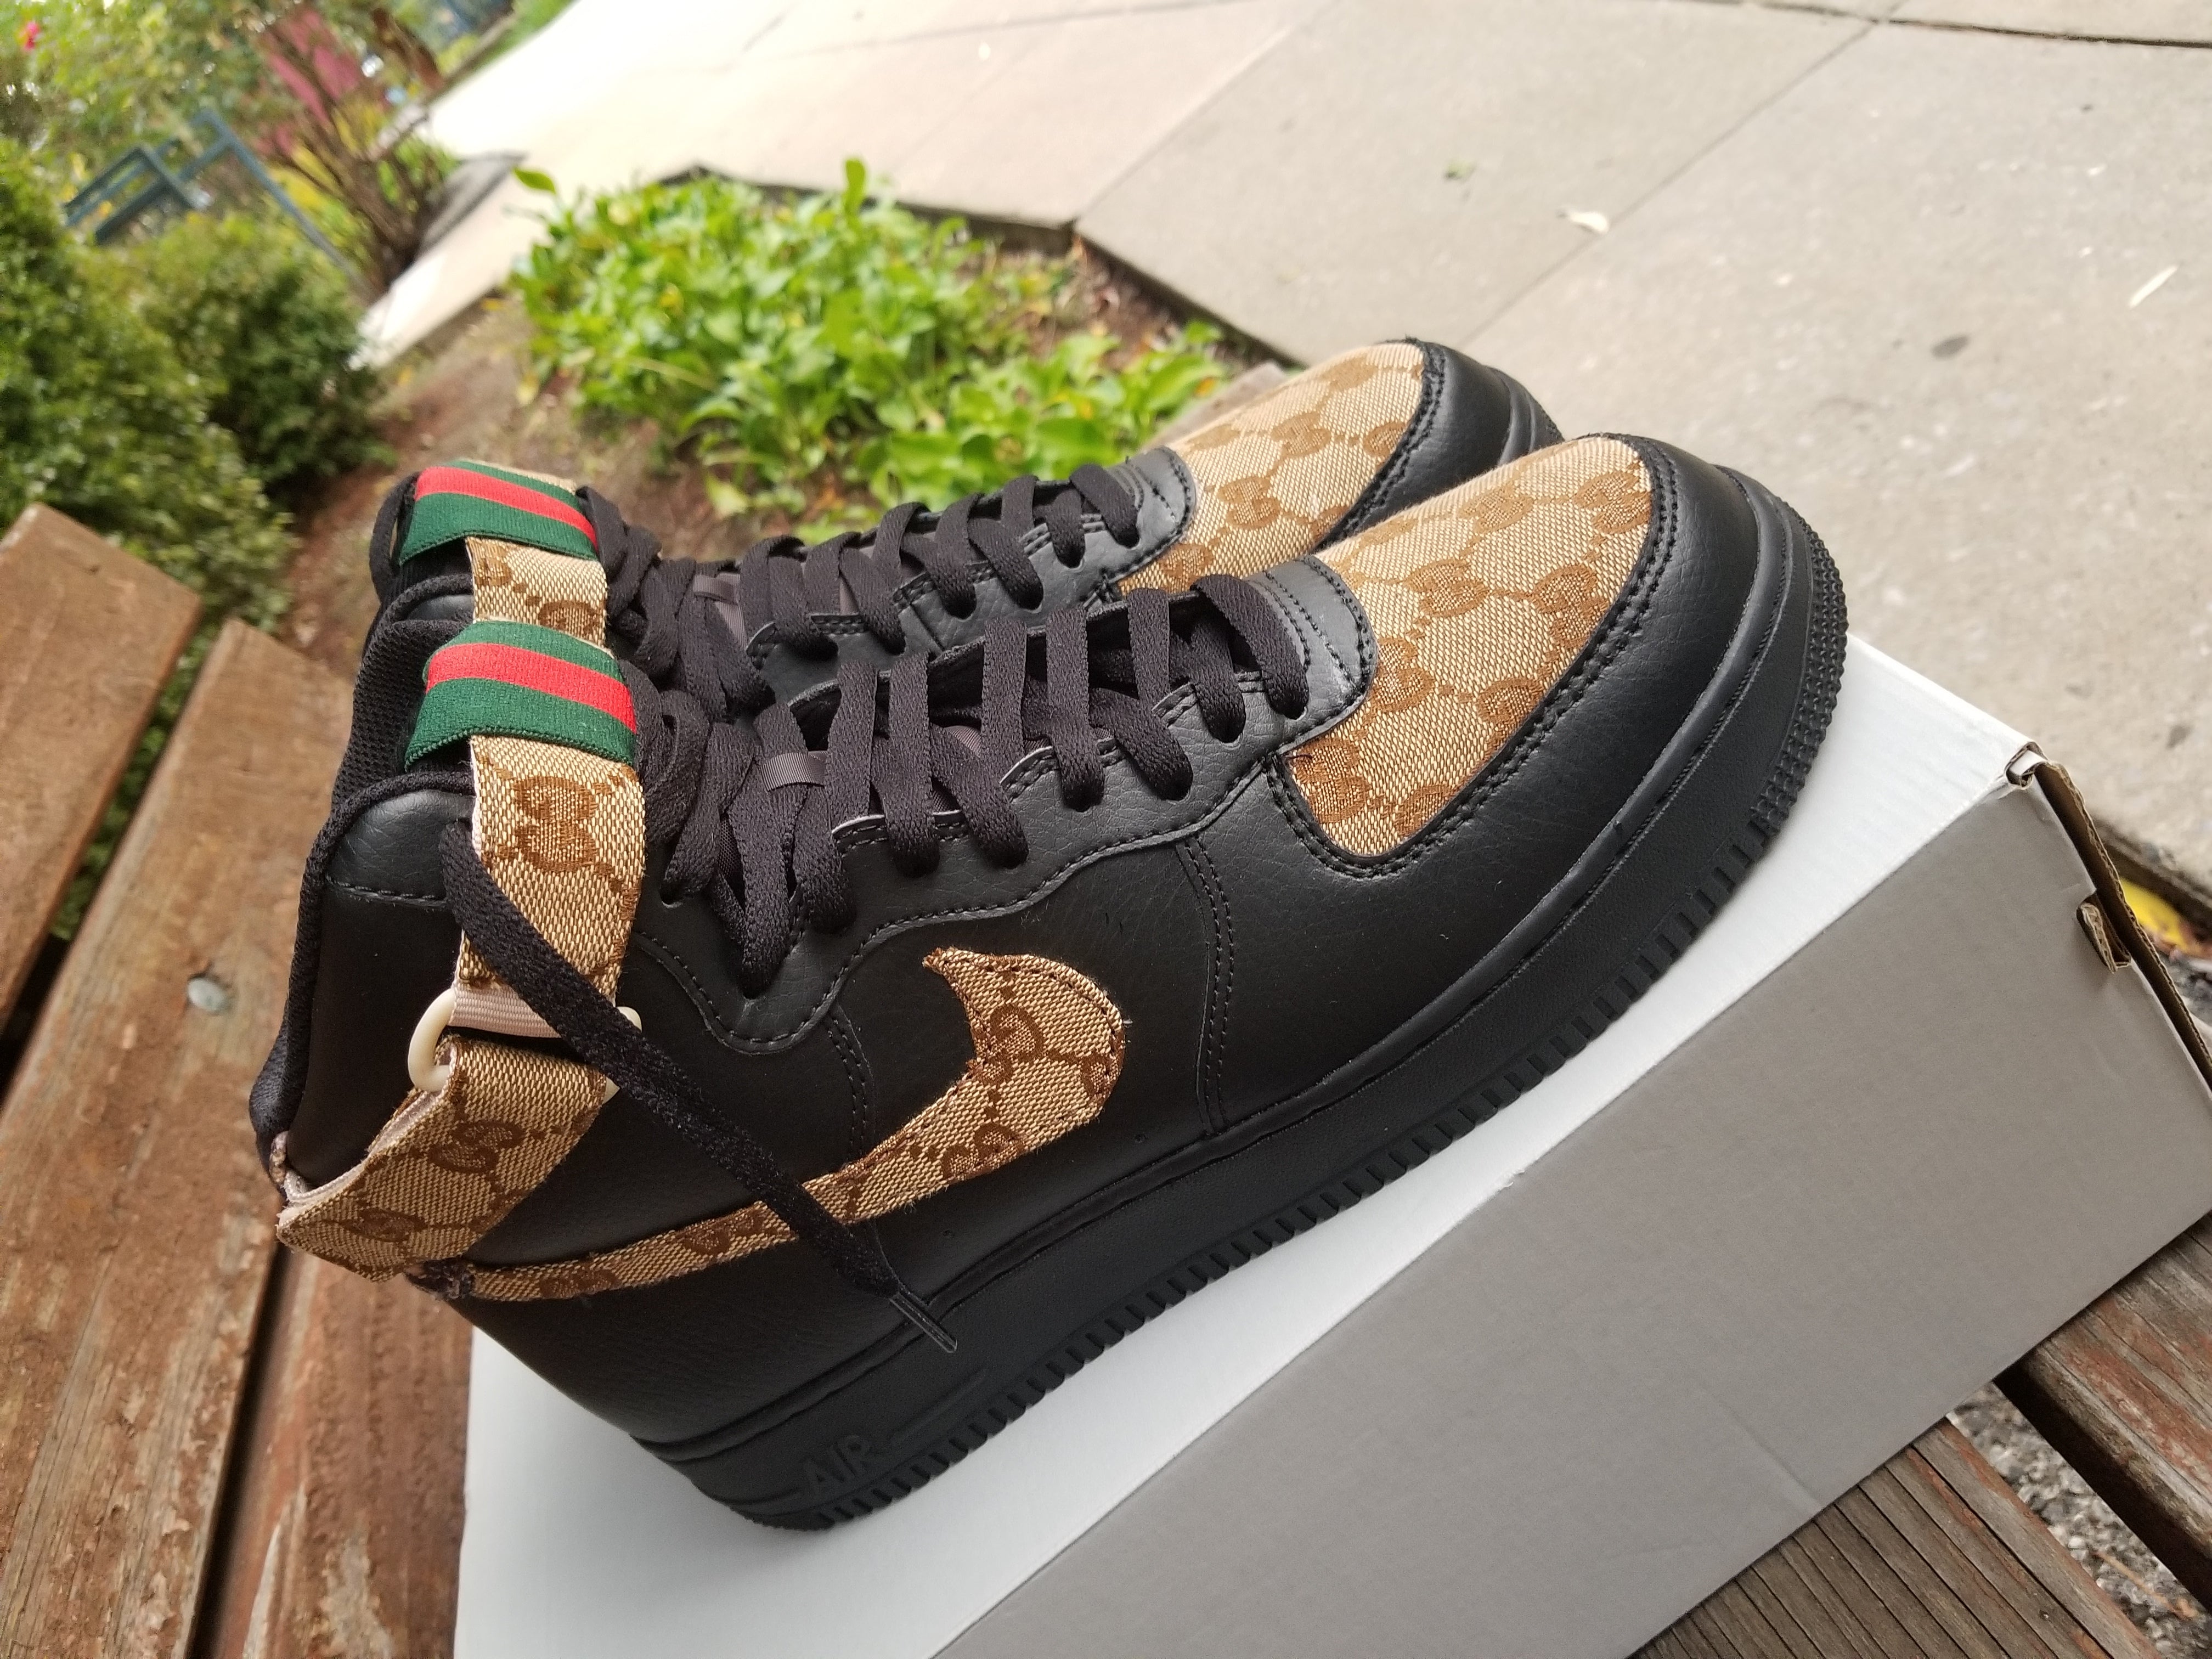 AF1 Black Gucci - Sneakers Custom - Customize your sneakers